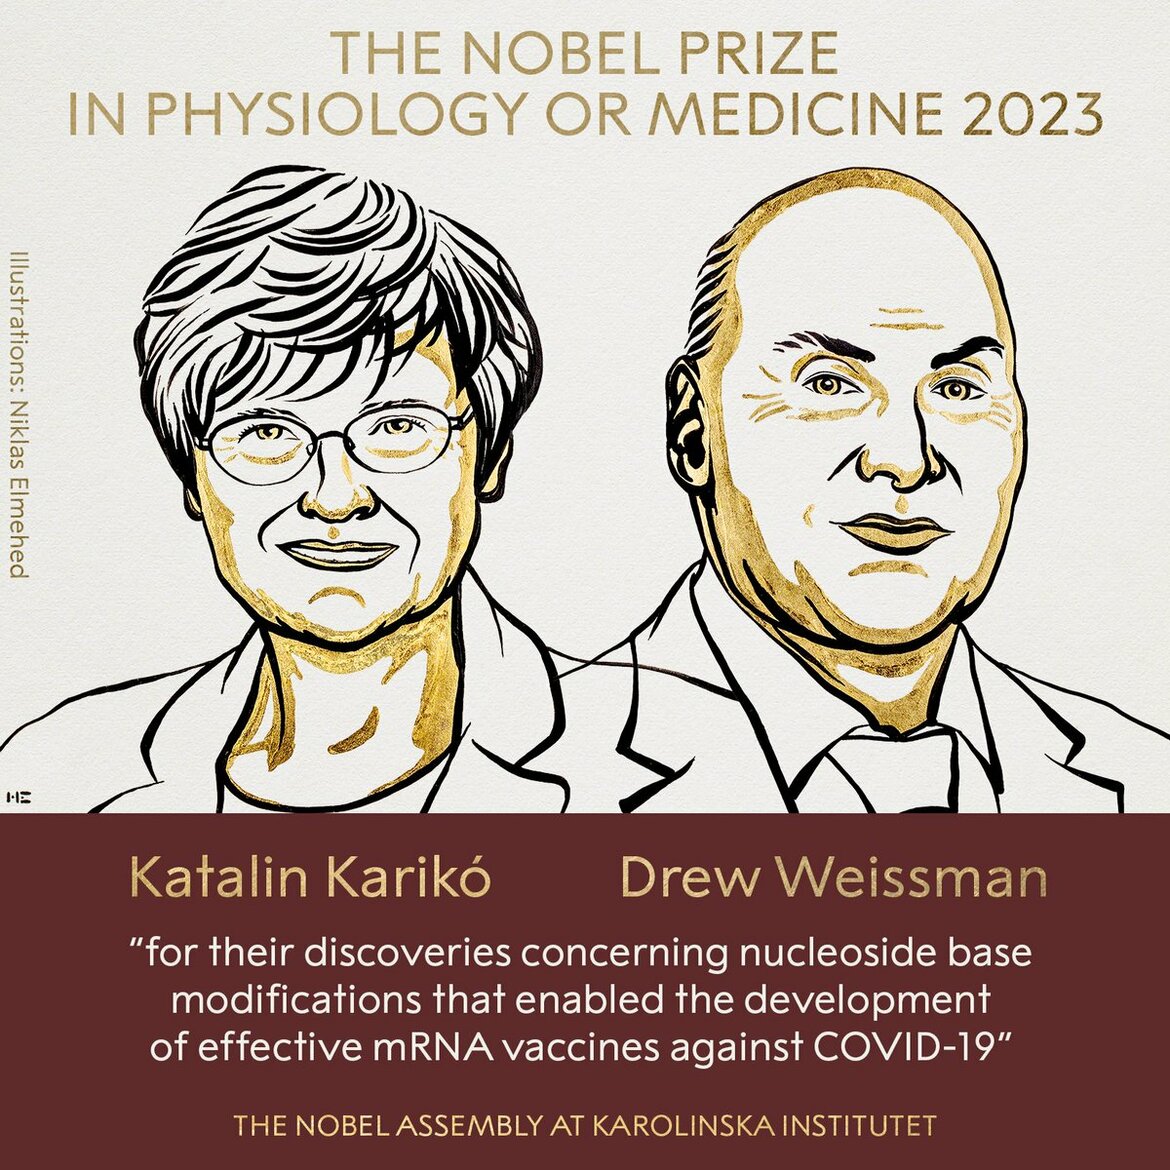 The Nobel Prize in Physiology or Medicine 2023 will be awarded to <a href="https://www.nobelprize.org/prizes/medicine/2023/summary/">Katalin Karikó and Drew Weissman</a> <I>for their discoveries concerning nucleoside base modifications that enabled the development of effective mRNA vaccines against COVID-19</I>.